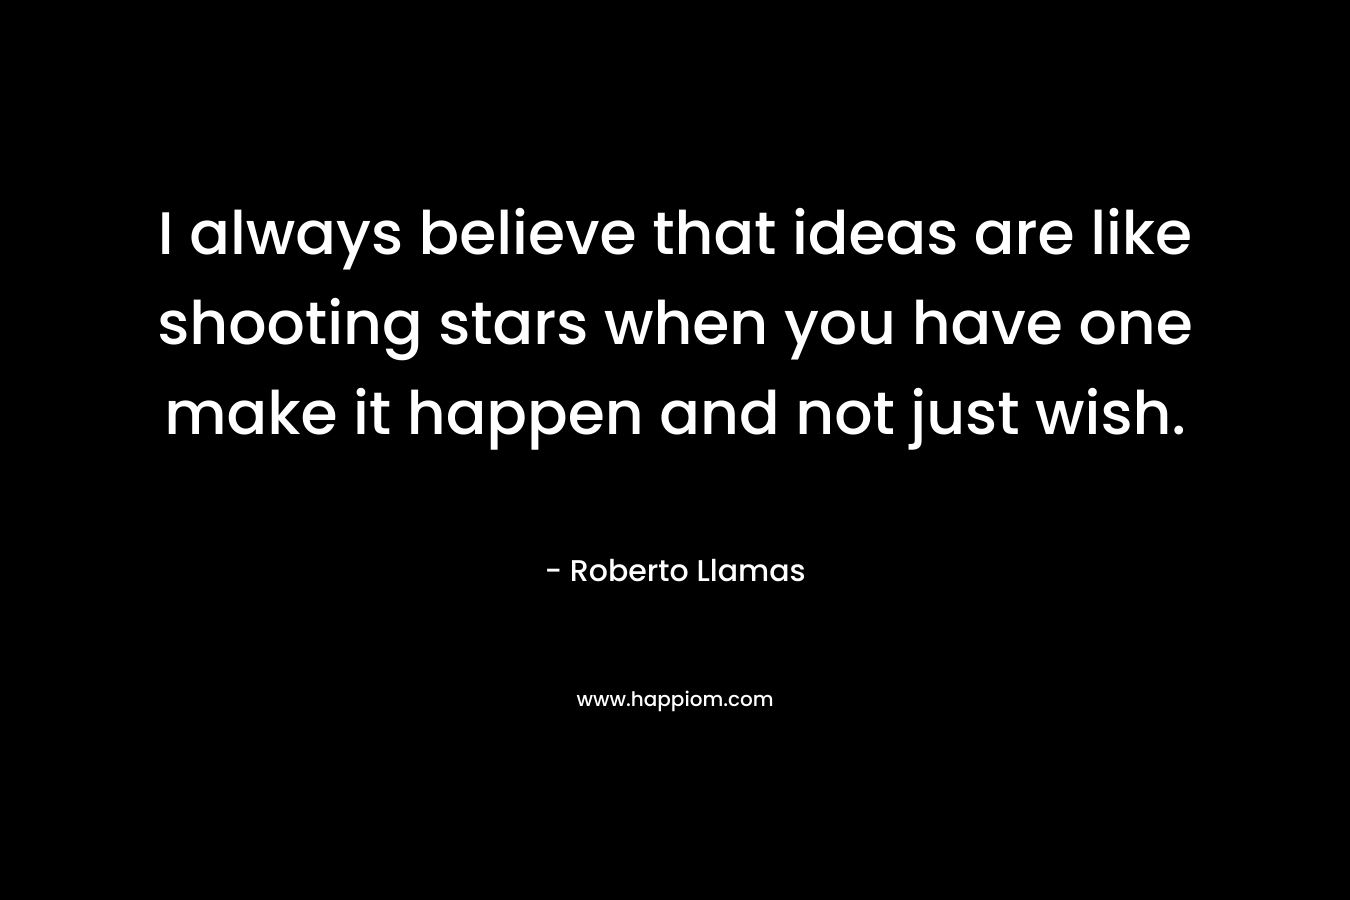 I always believe that ideas are like shooting stars when you have one make it happen and not just wish. – Roberto Llamas